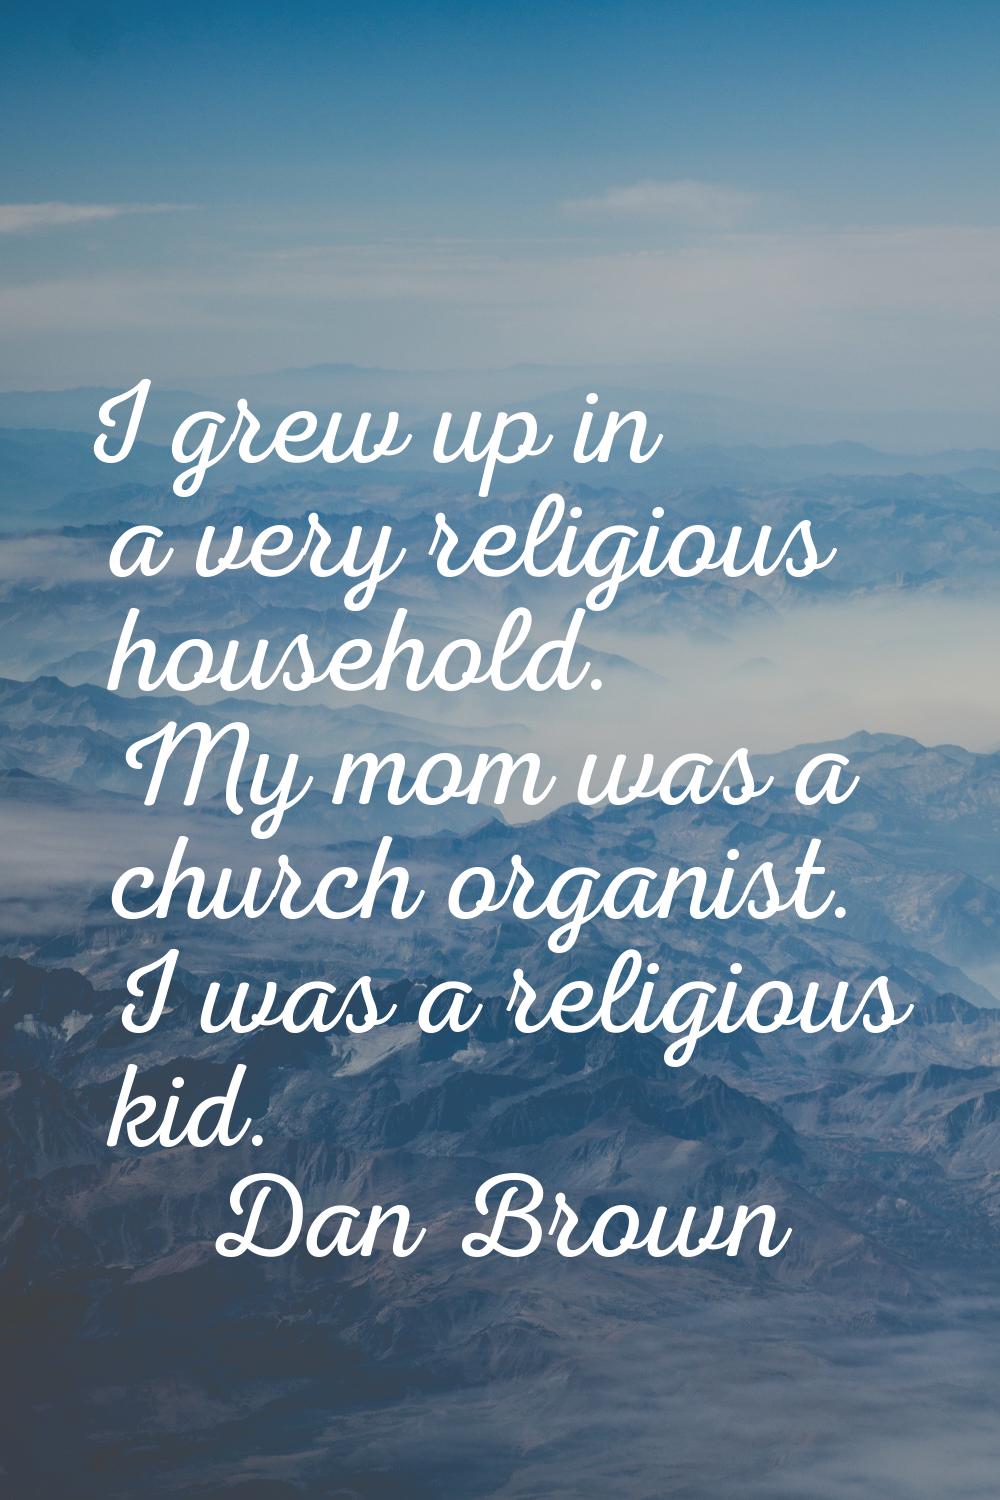 I grew up in a very religious household. My mom was a church organist. I was a religious kid.